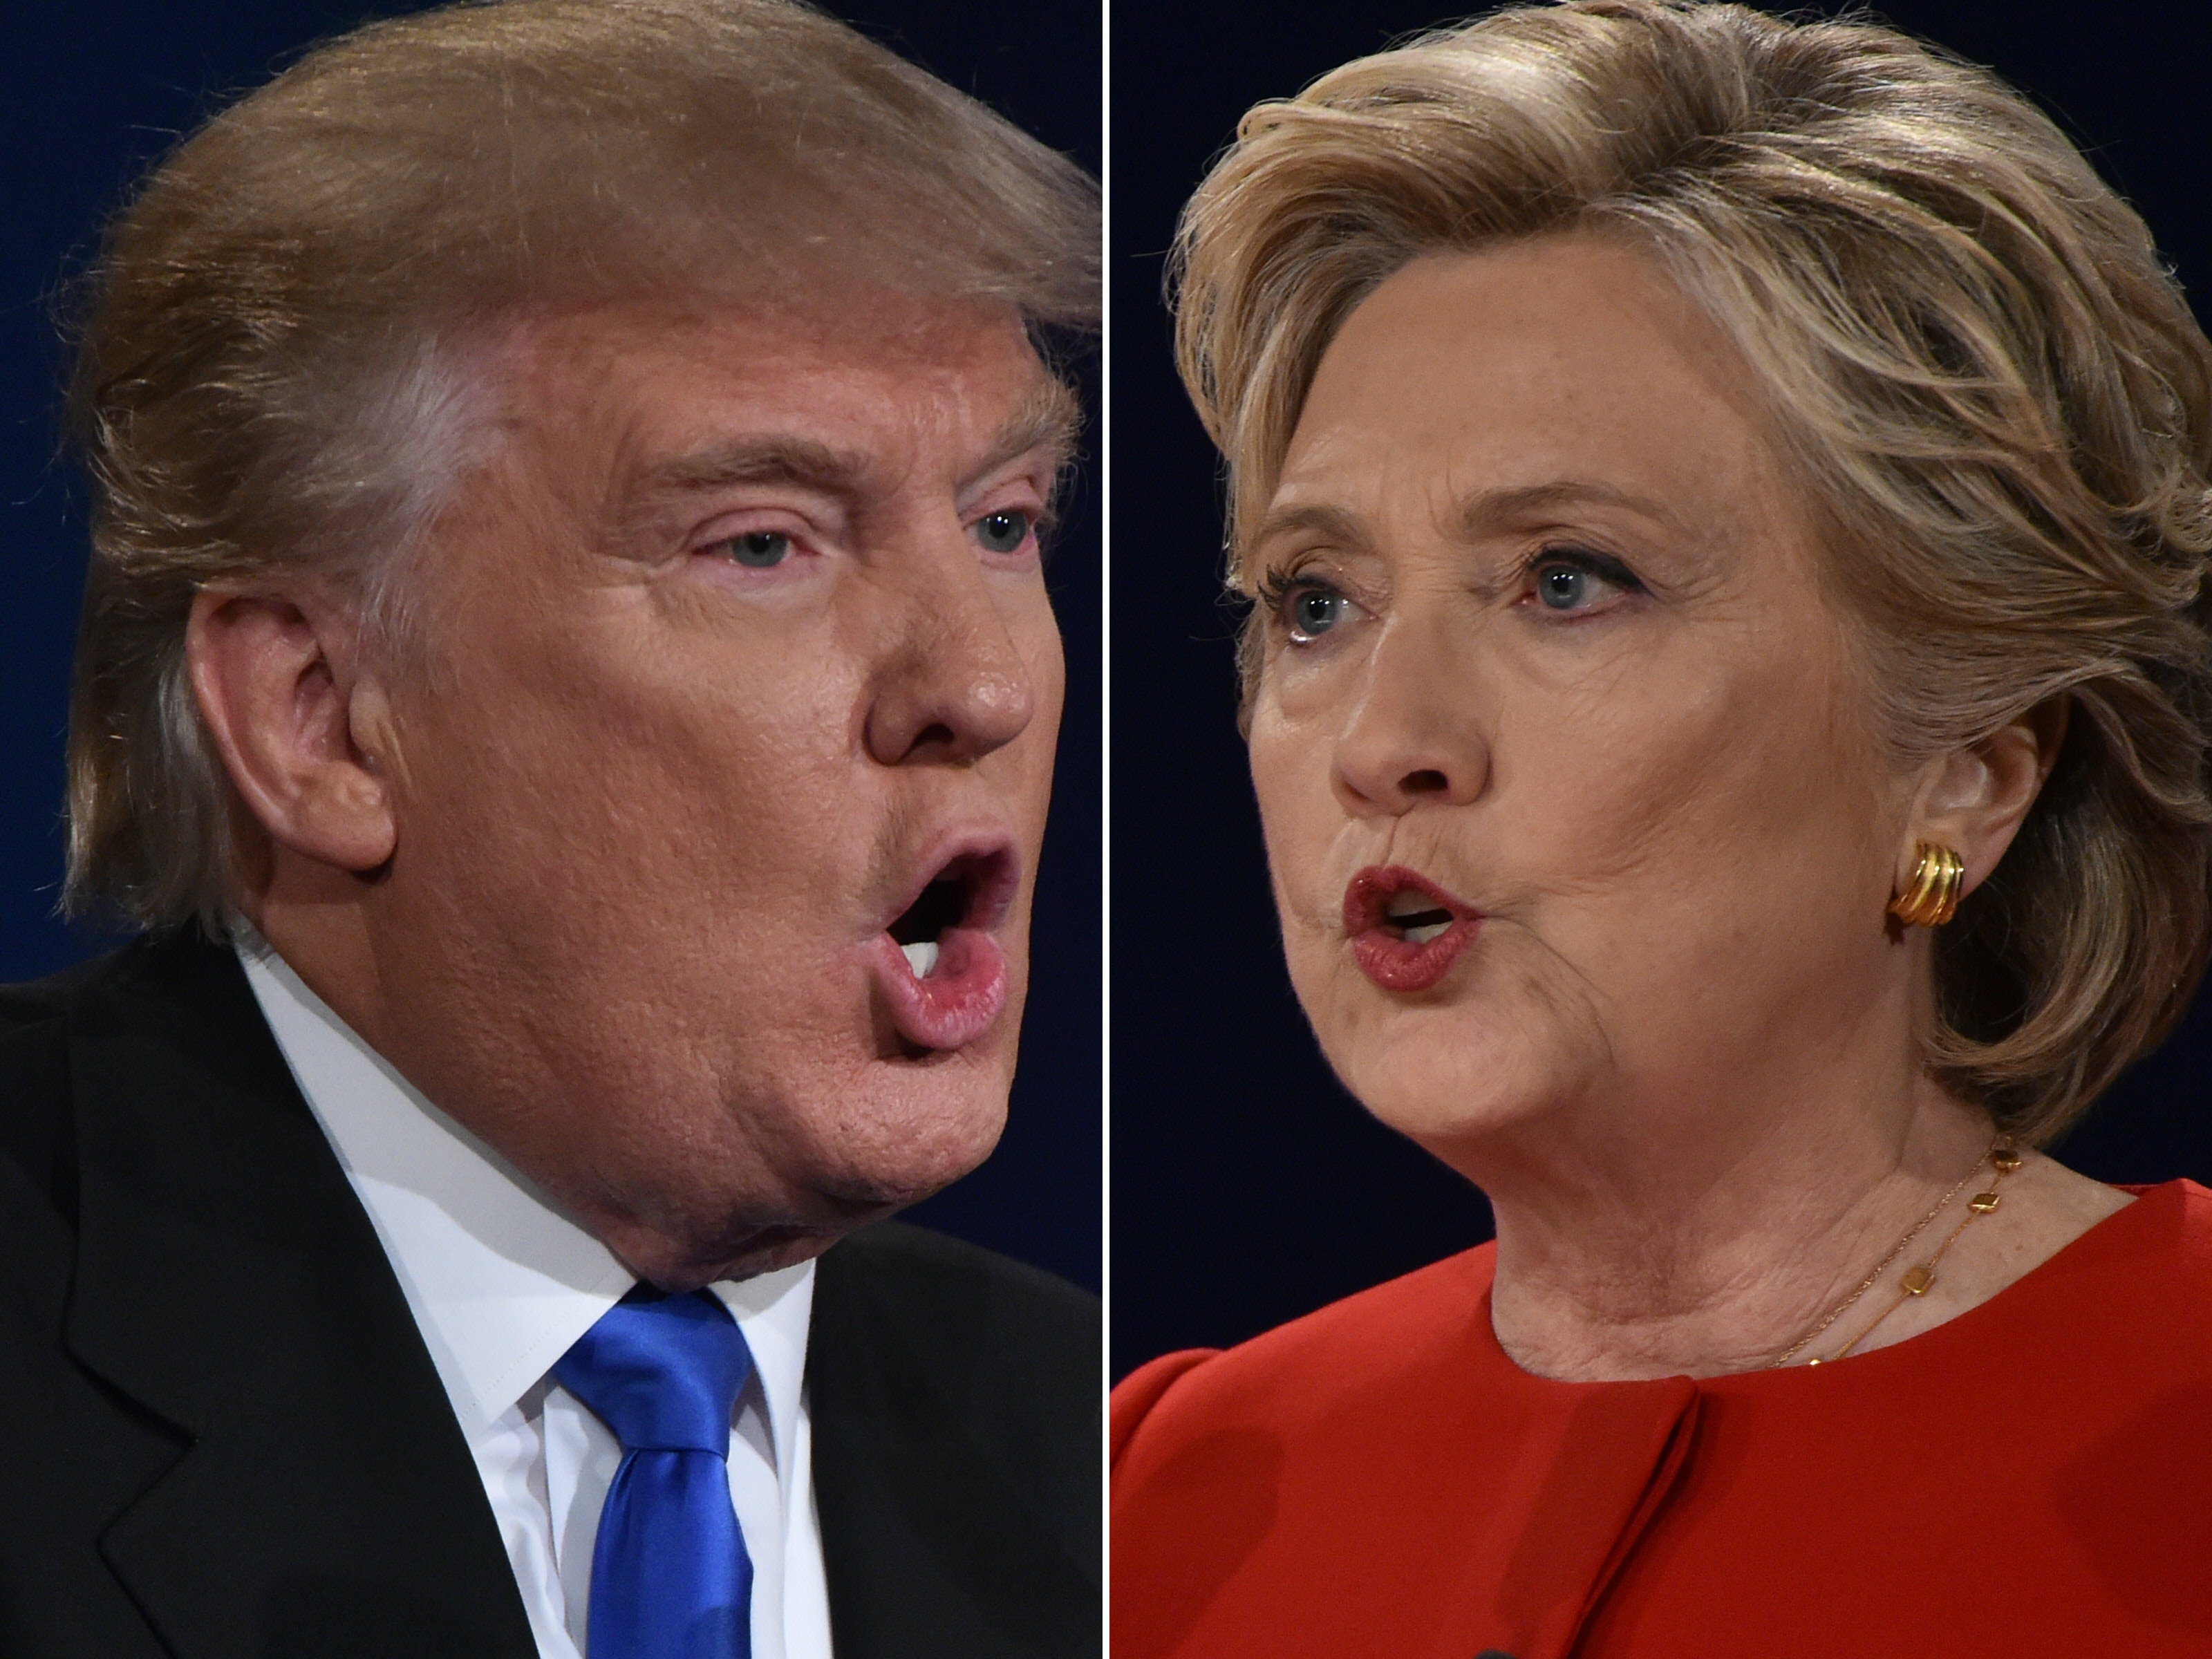 Republican nominee Donald Trump and Democratic nominee Hillary Clinton face off during the first presidential debate at Hofstra University in Hempstead, N.Y., on Sept. 26, 2016. (Paul J. Richard—AFP/Getty Images)